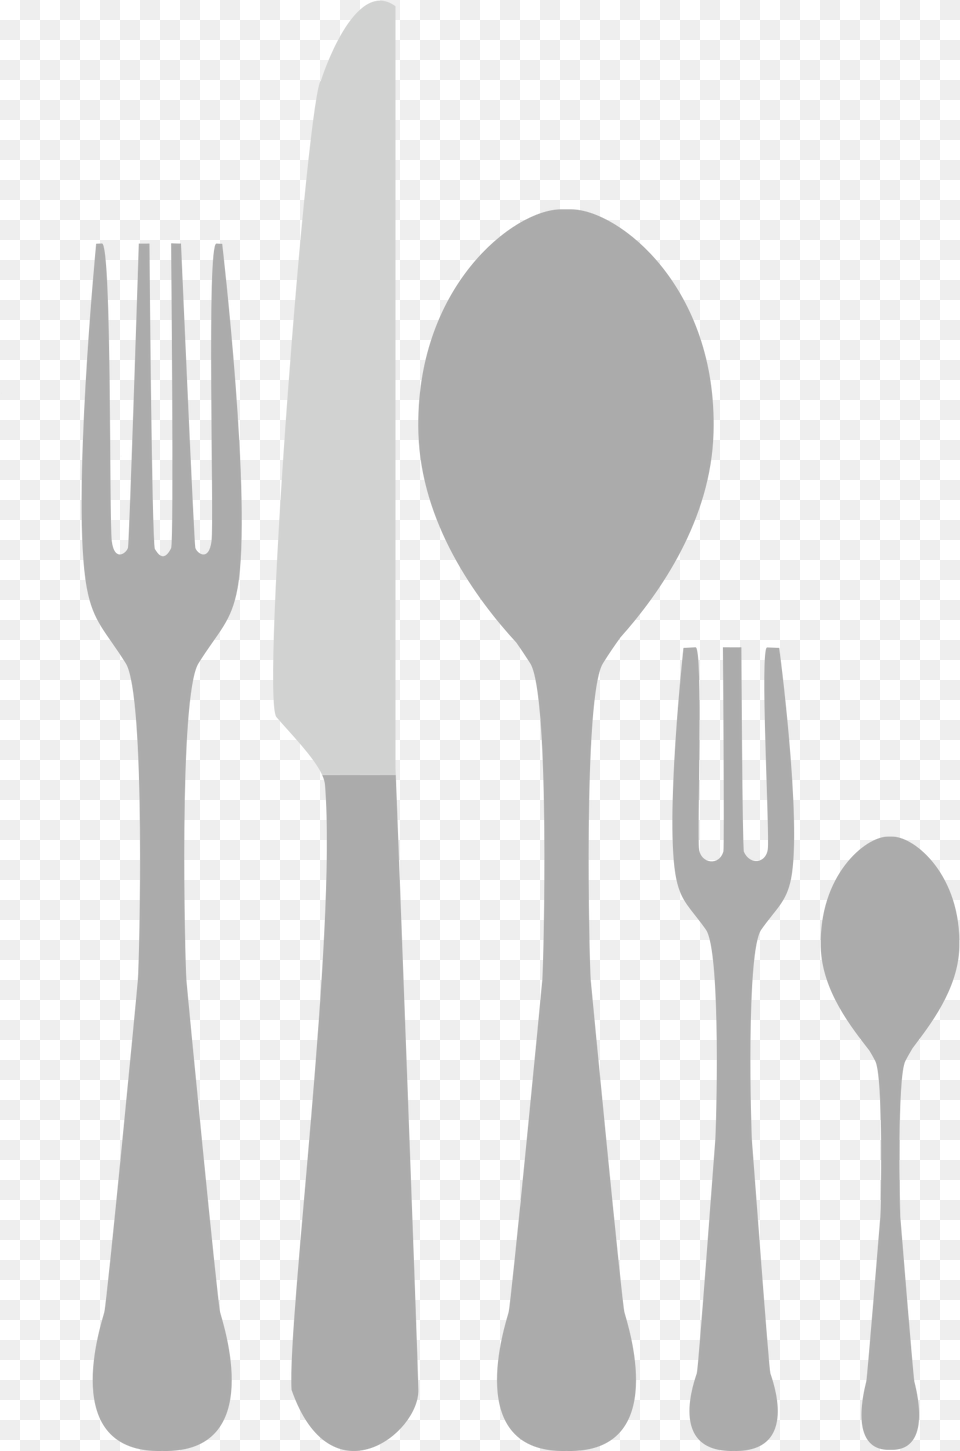 Forkspooncutlery Cutlery Clipart, Fork, Spoon Png